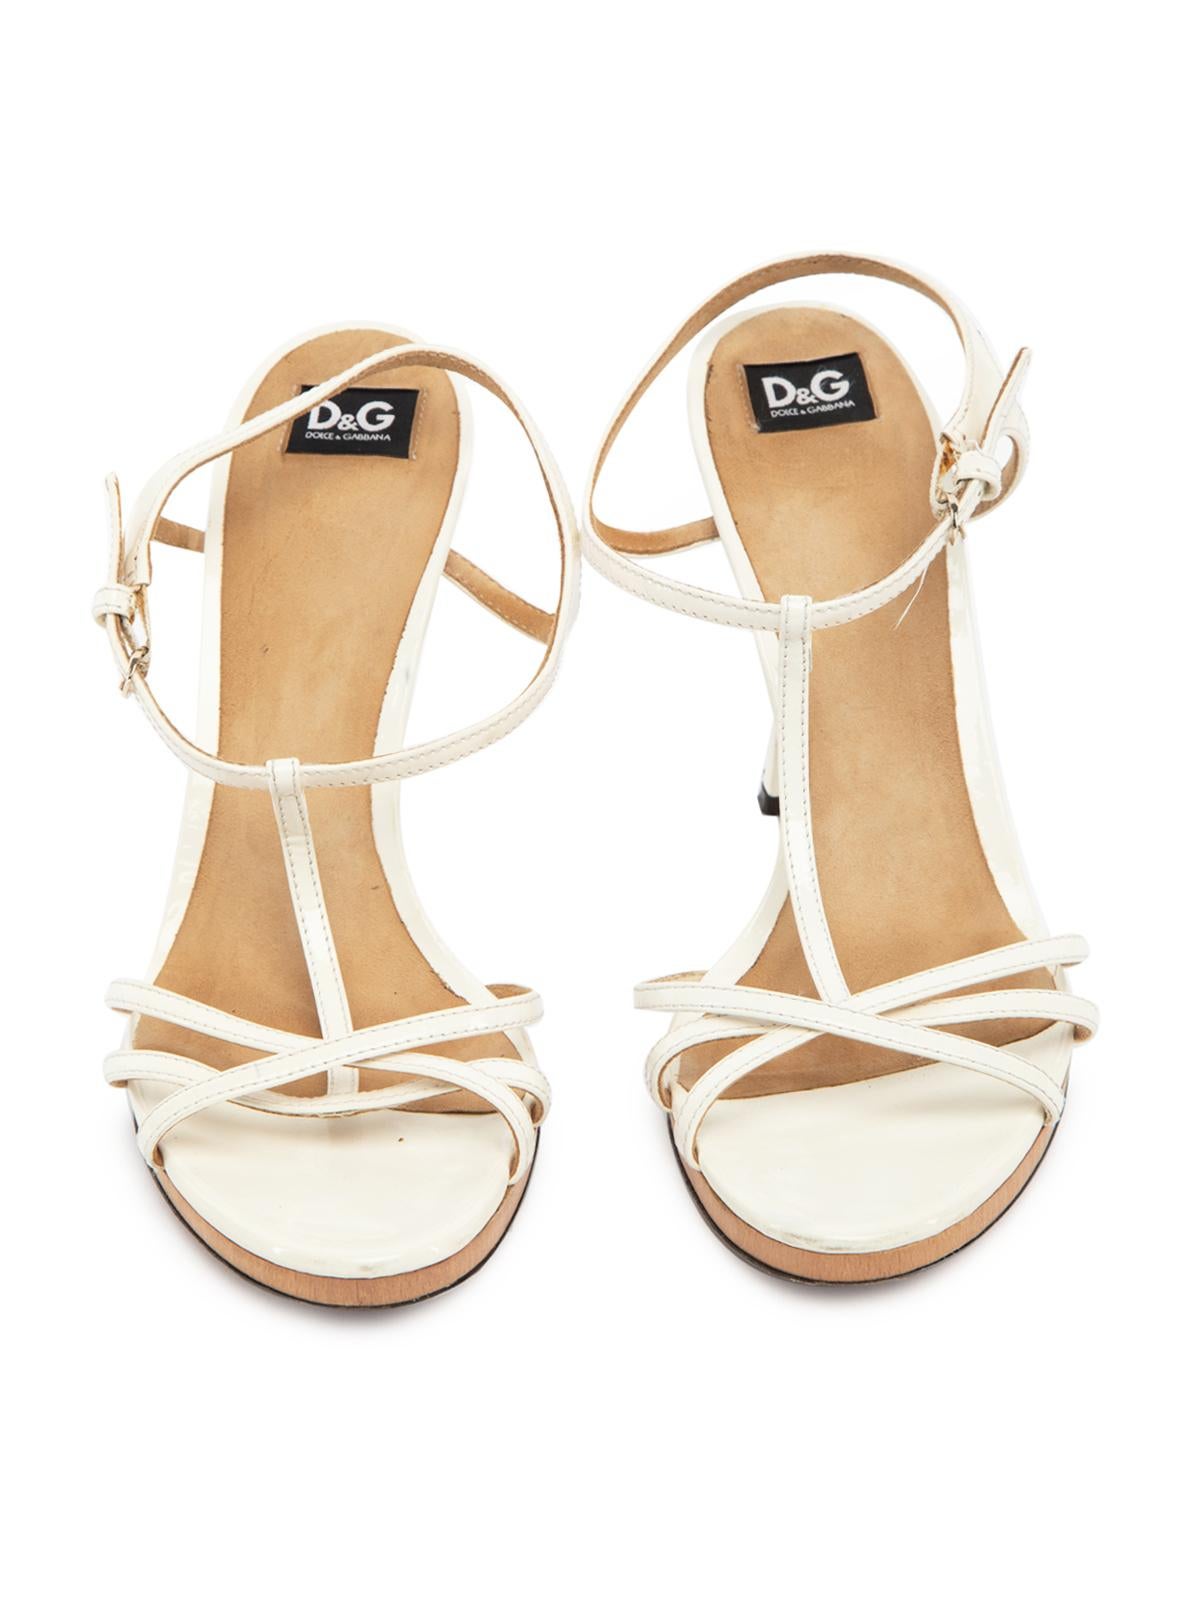 Pre-Loved Dolce & Gabbana Women's White Leather Patent Sandal Heels In Excellent Condition In London, GB